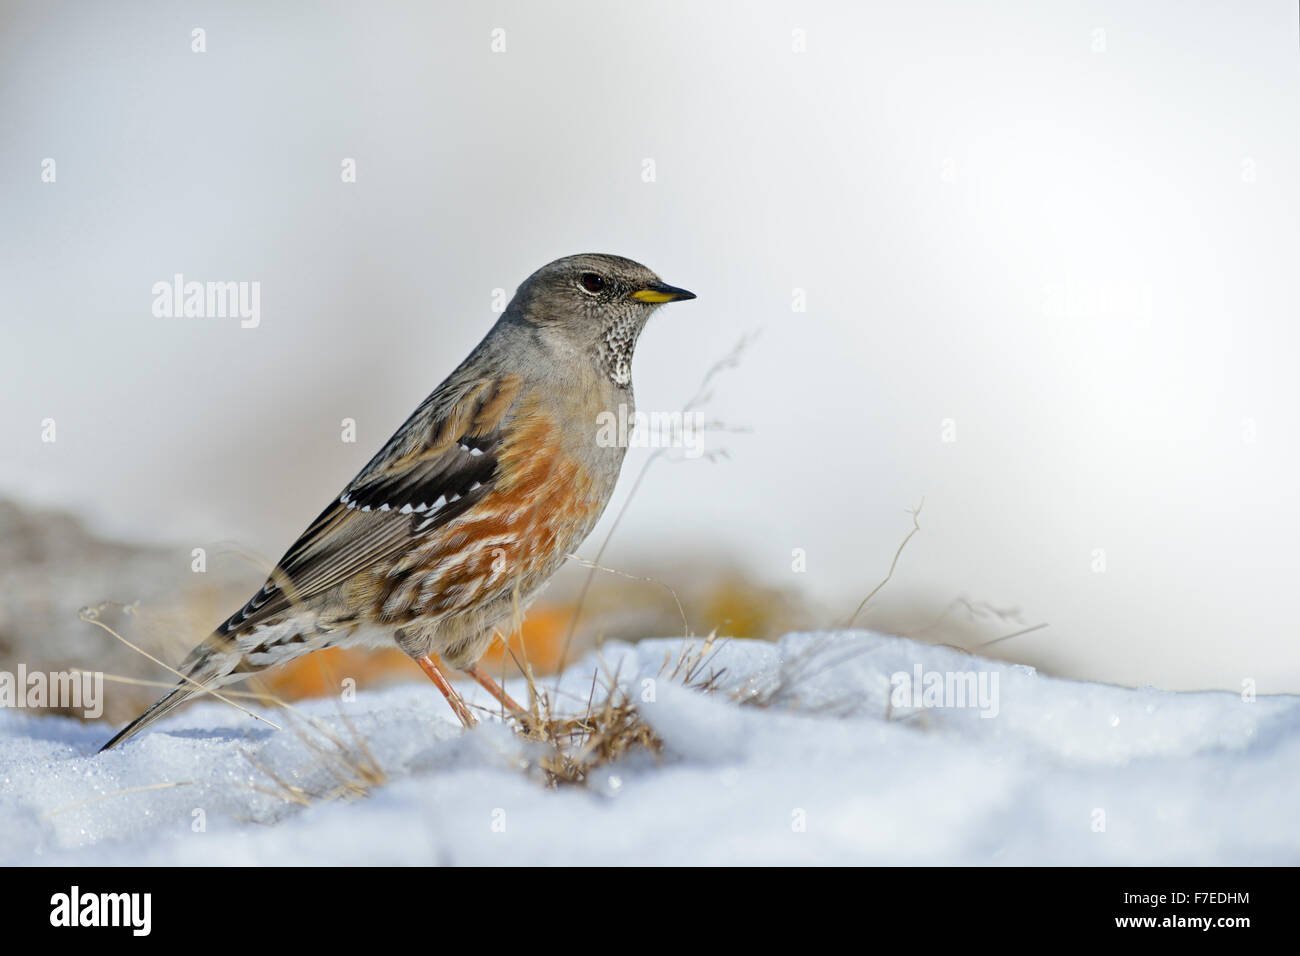 Alpine accentor / Alpenbraunelle ( Prunella collaris ) stands in snow with some grass comes through to find seeds. Stock Photo